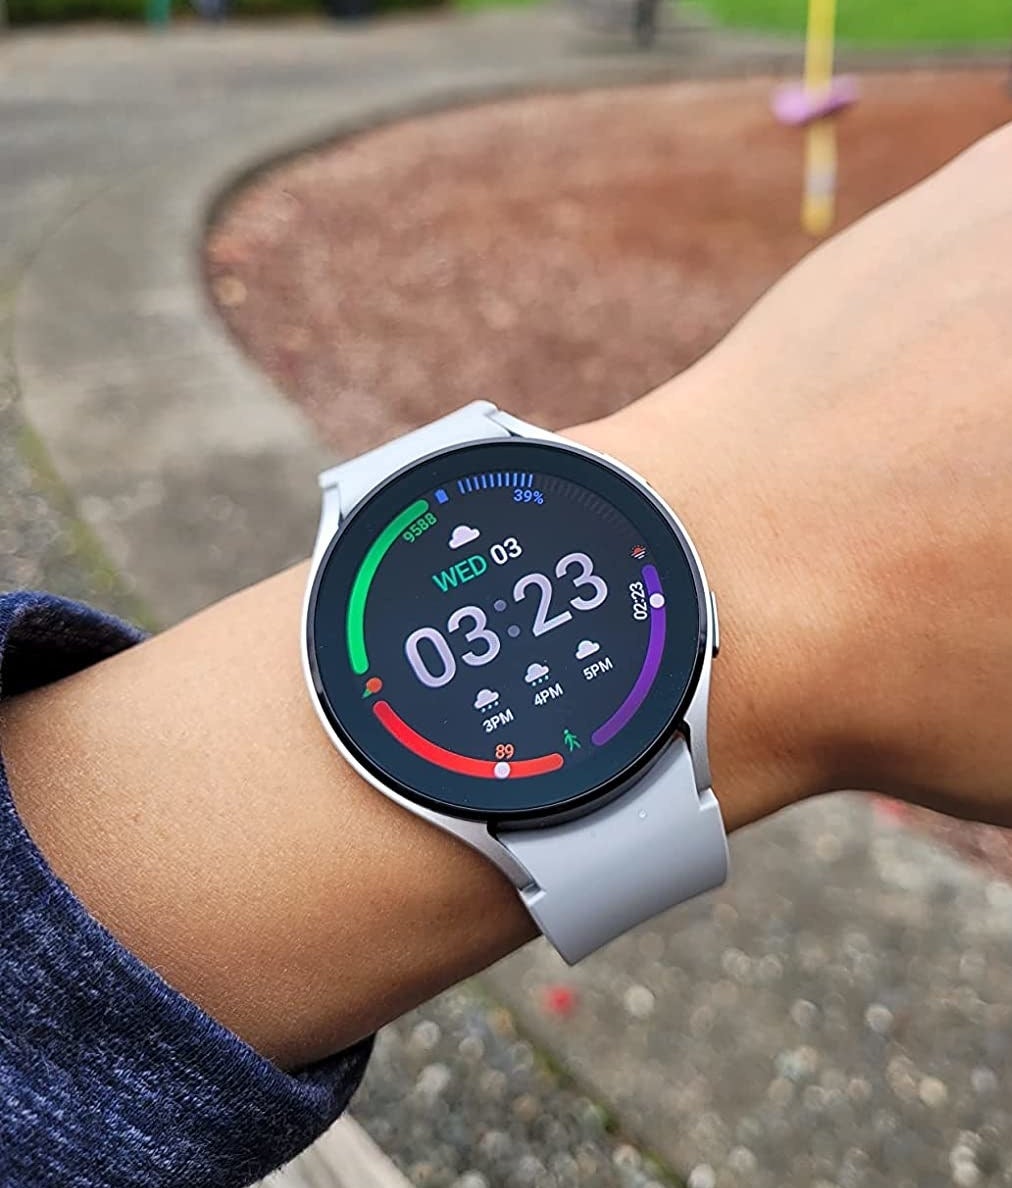 Reviewer wearing white smartwatch with black display screen showing the time, weather, fitness tracker